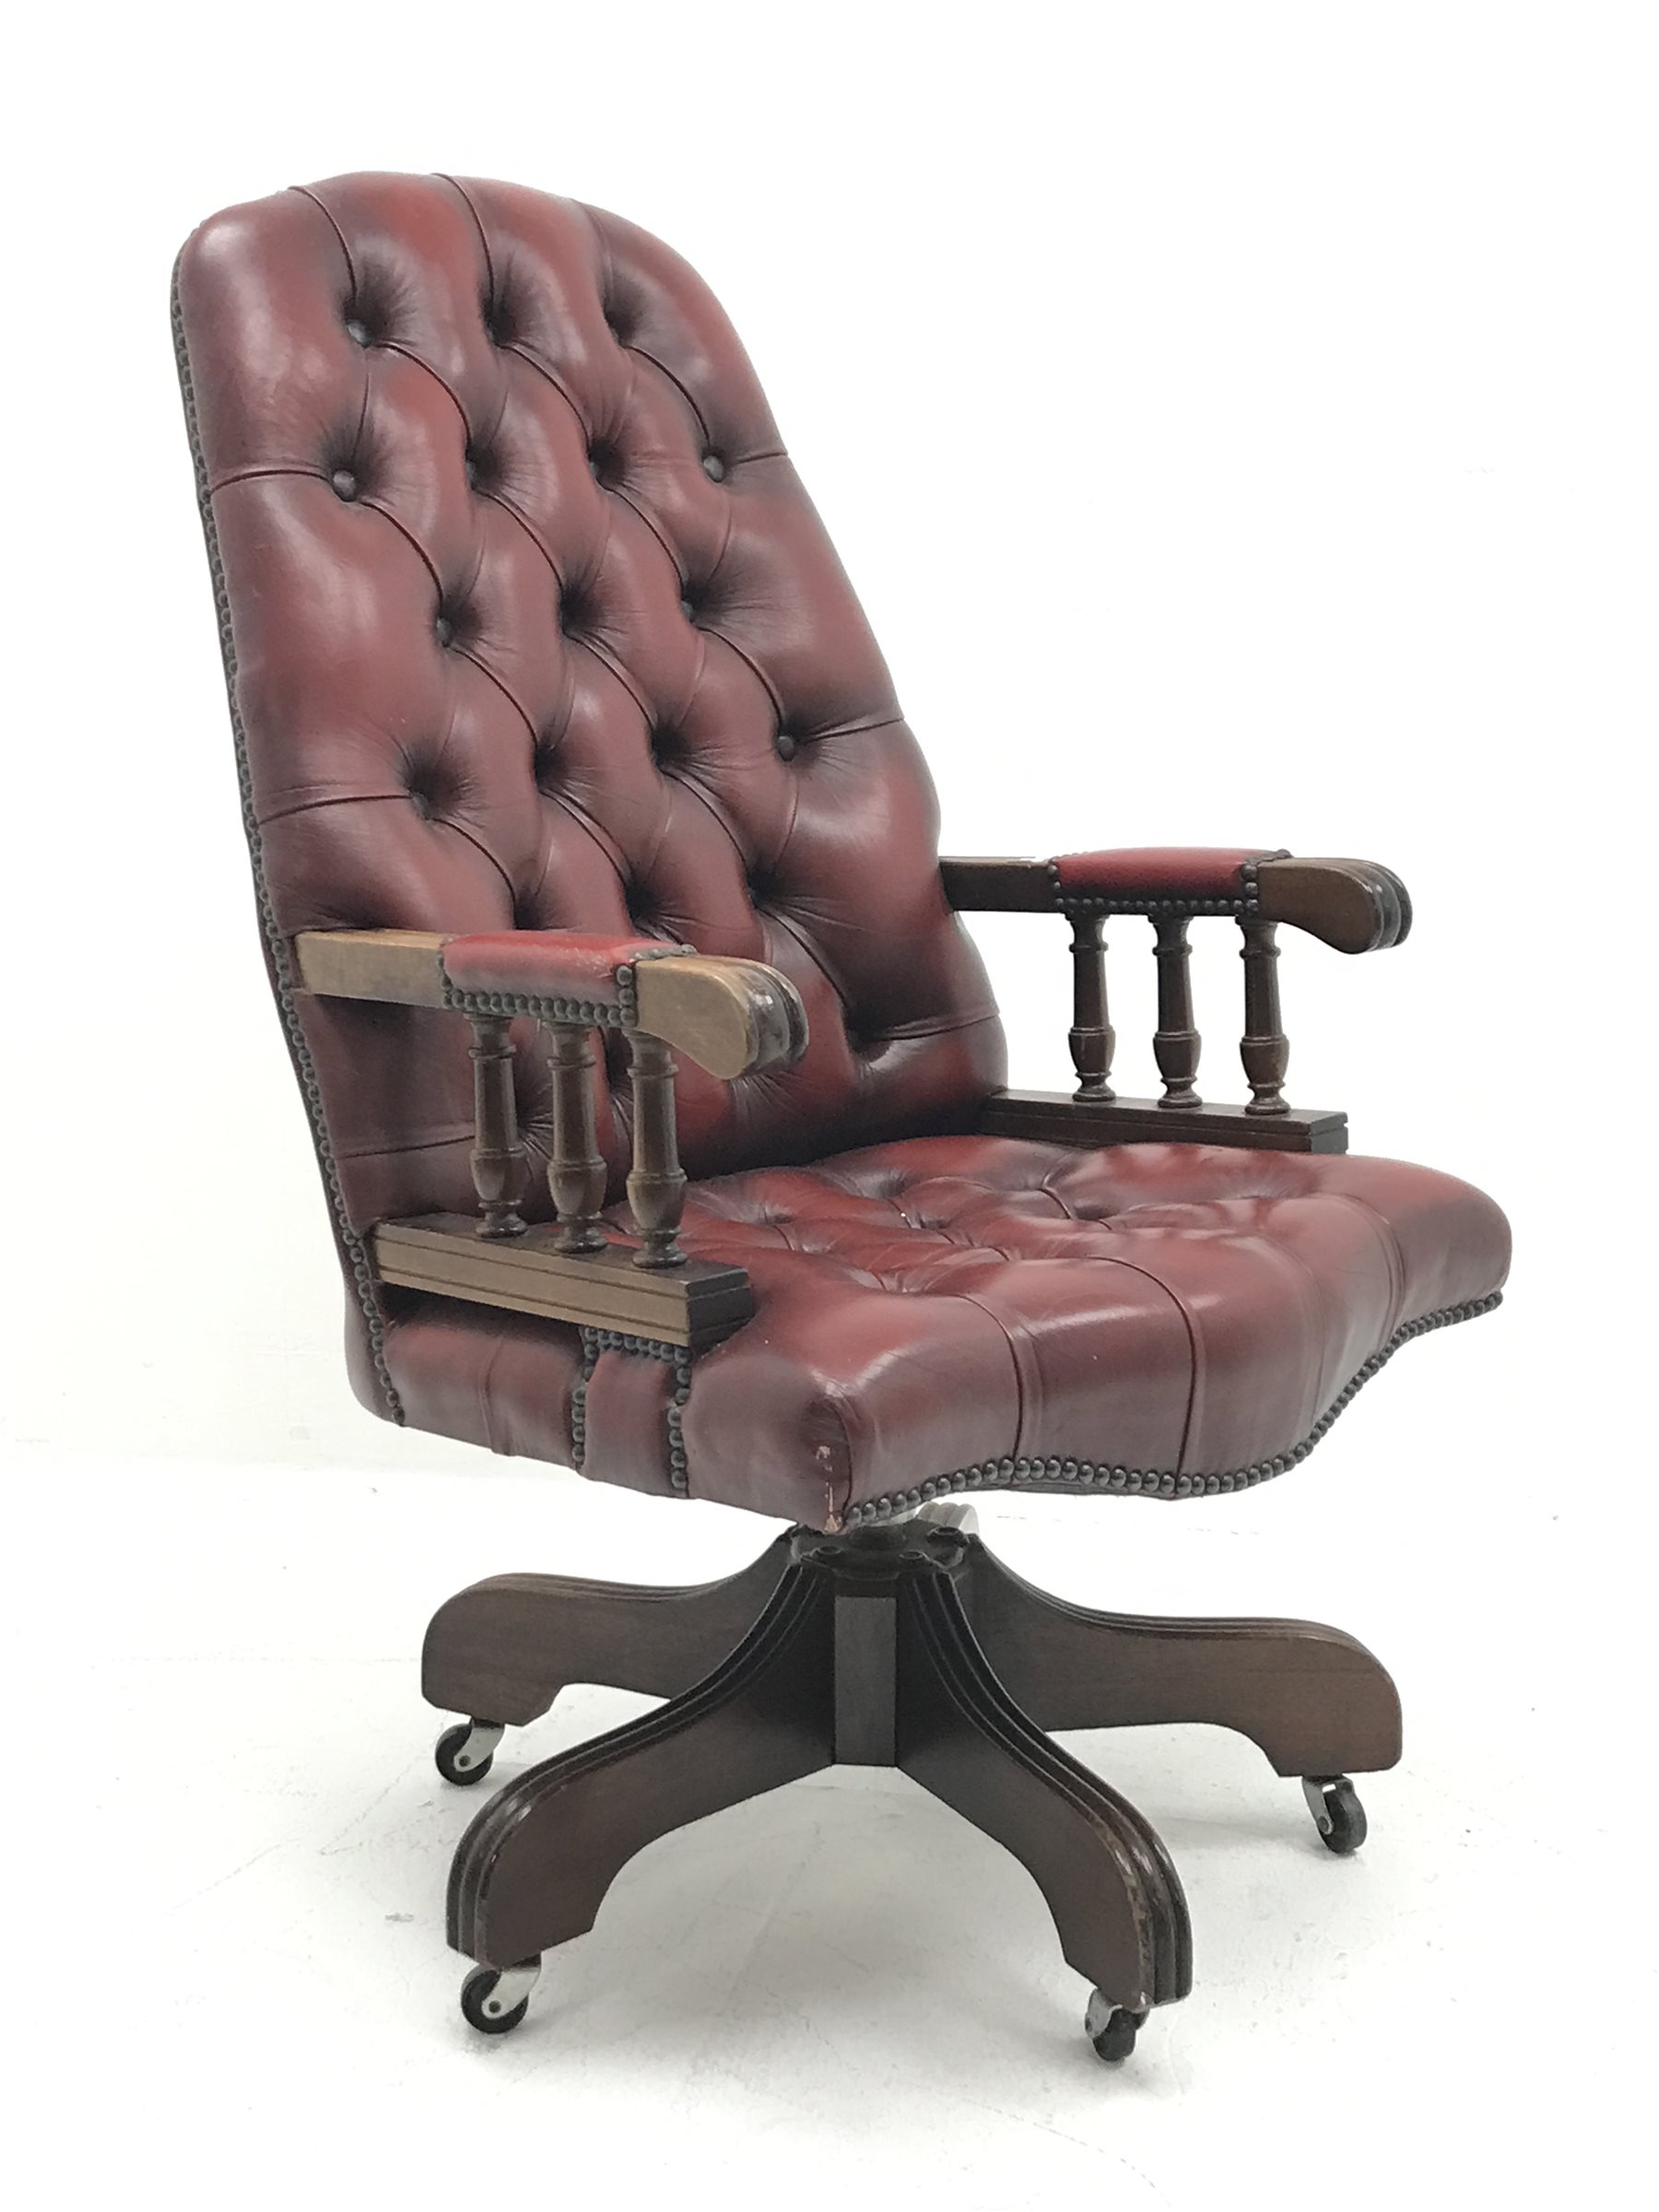 Swivel reclining desk chair upholstered in deep buttoned oxblood leather, W60cm - Image 3 of 3